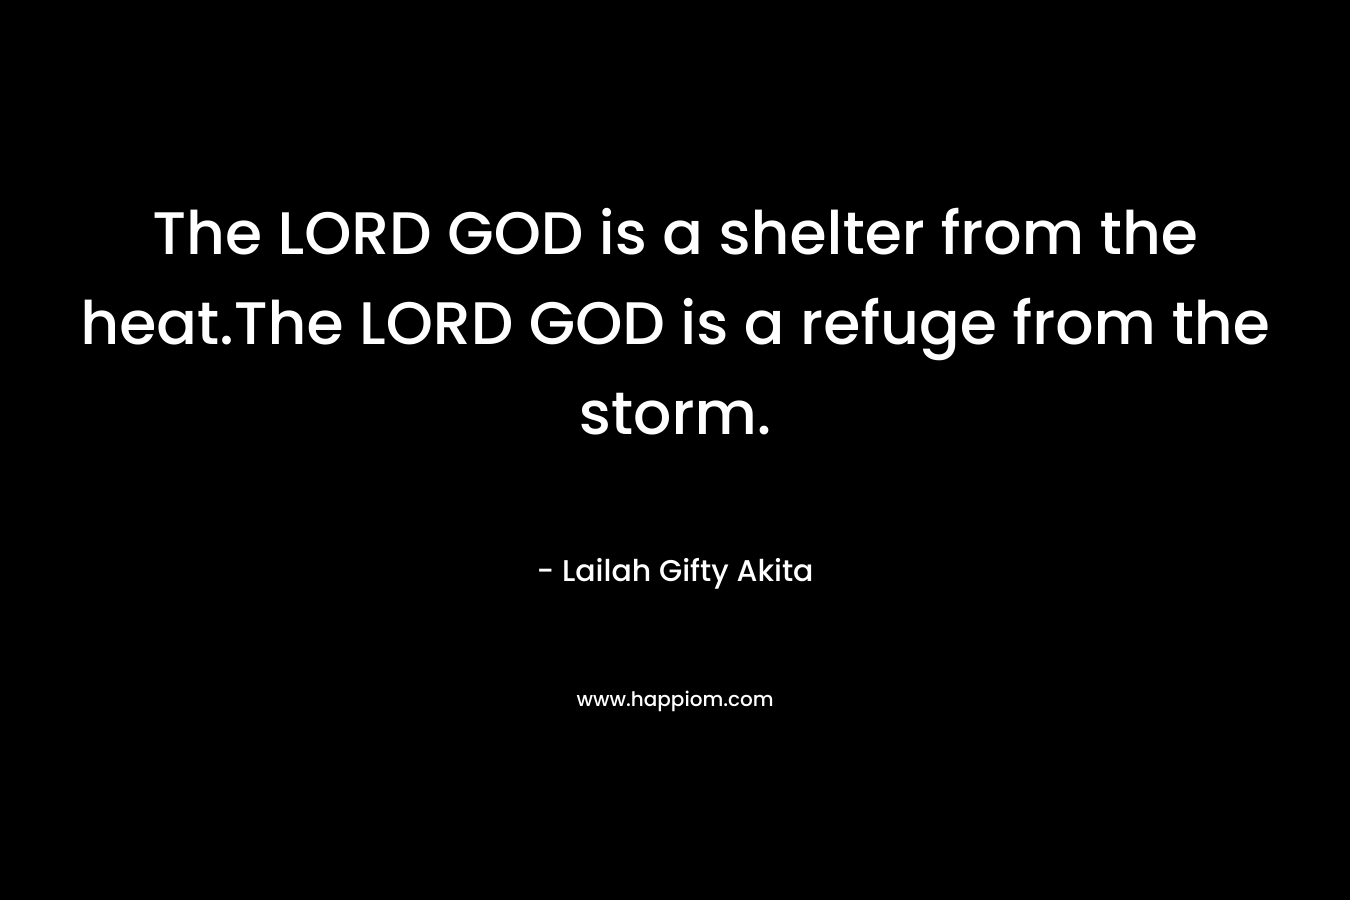 The LORD GOD is a shelter from the heat.The LORD GOD is a refuge from the storm.